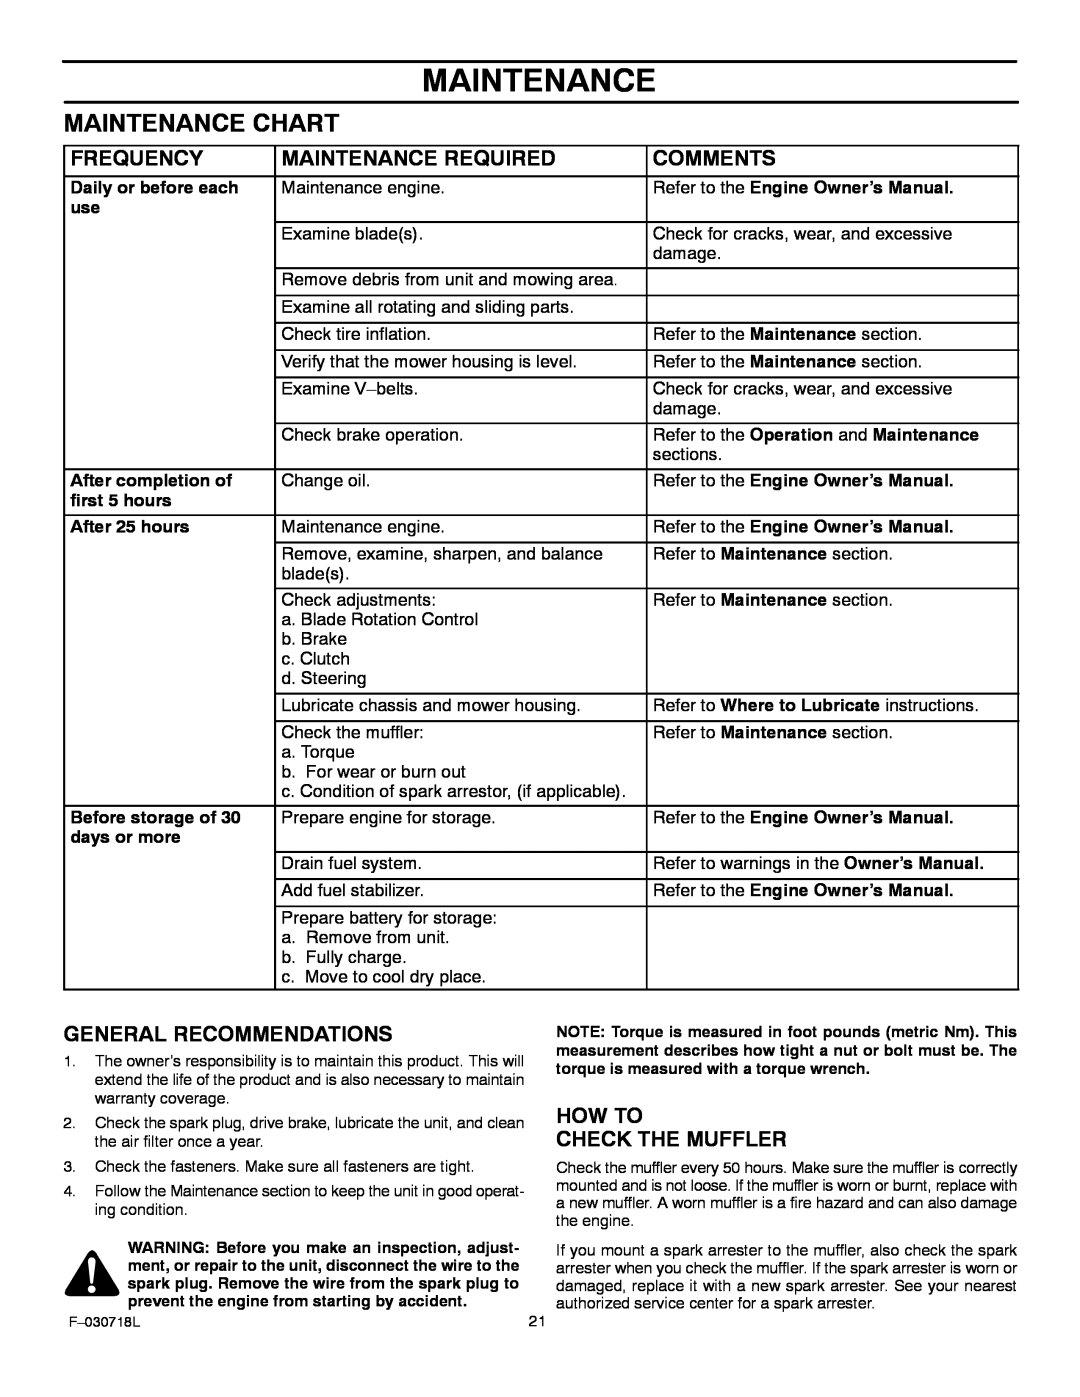 Murray 461000x8A manual Maintenance Chart, Frequency, Maintenance Required, Comments, General Recommendations 